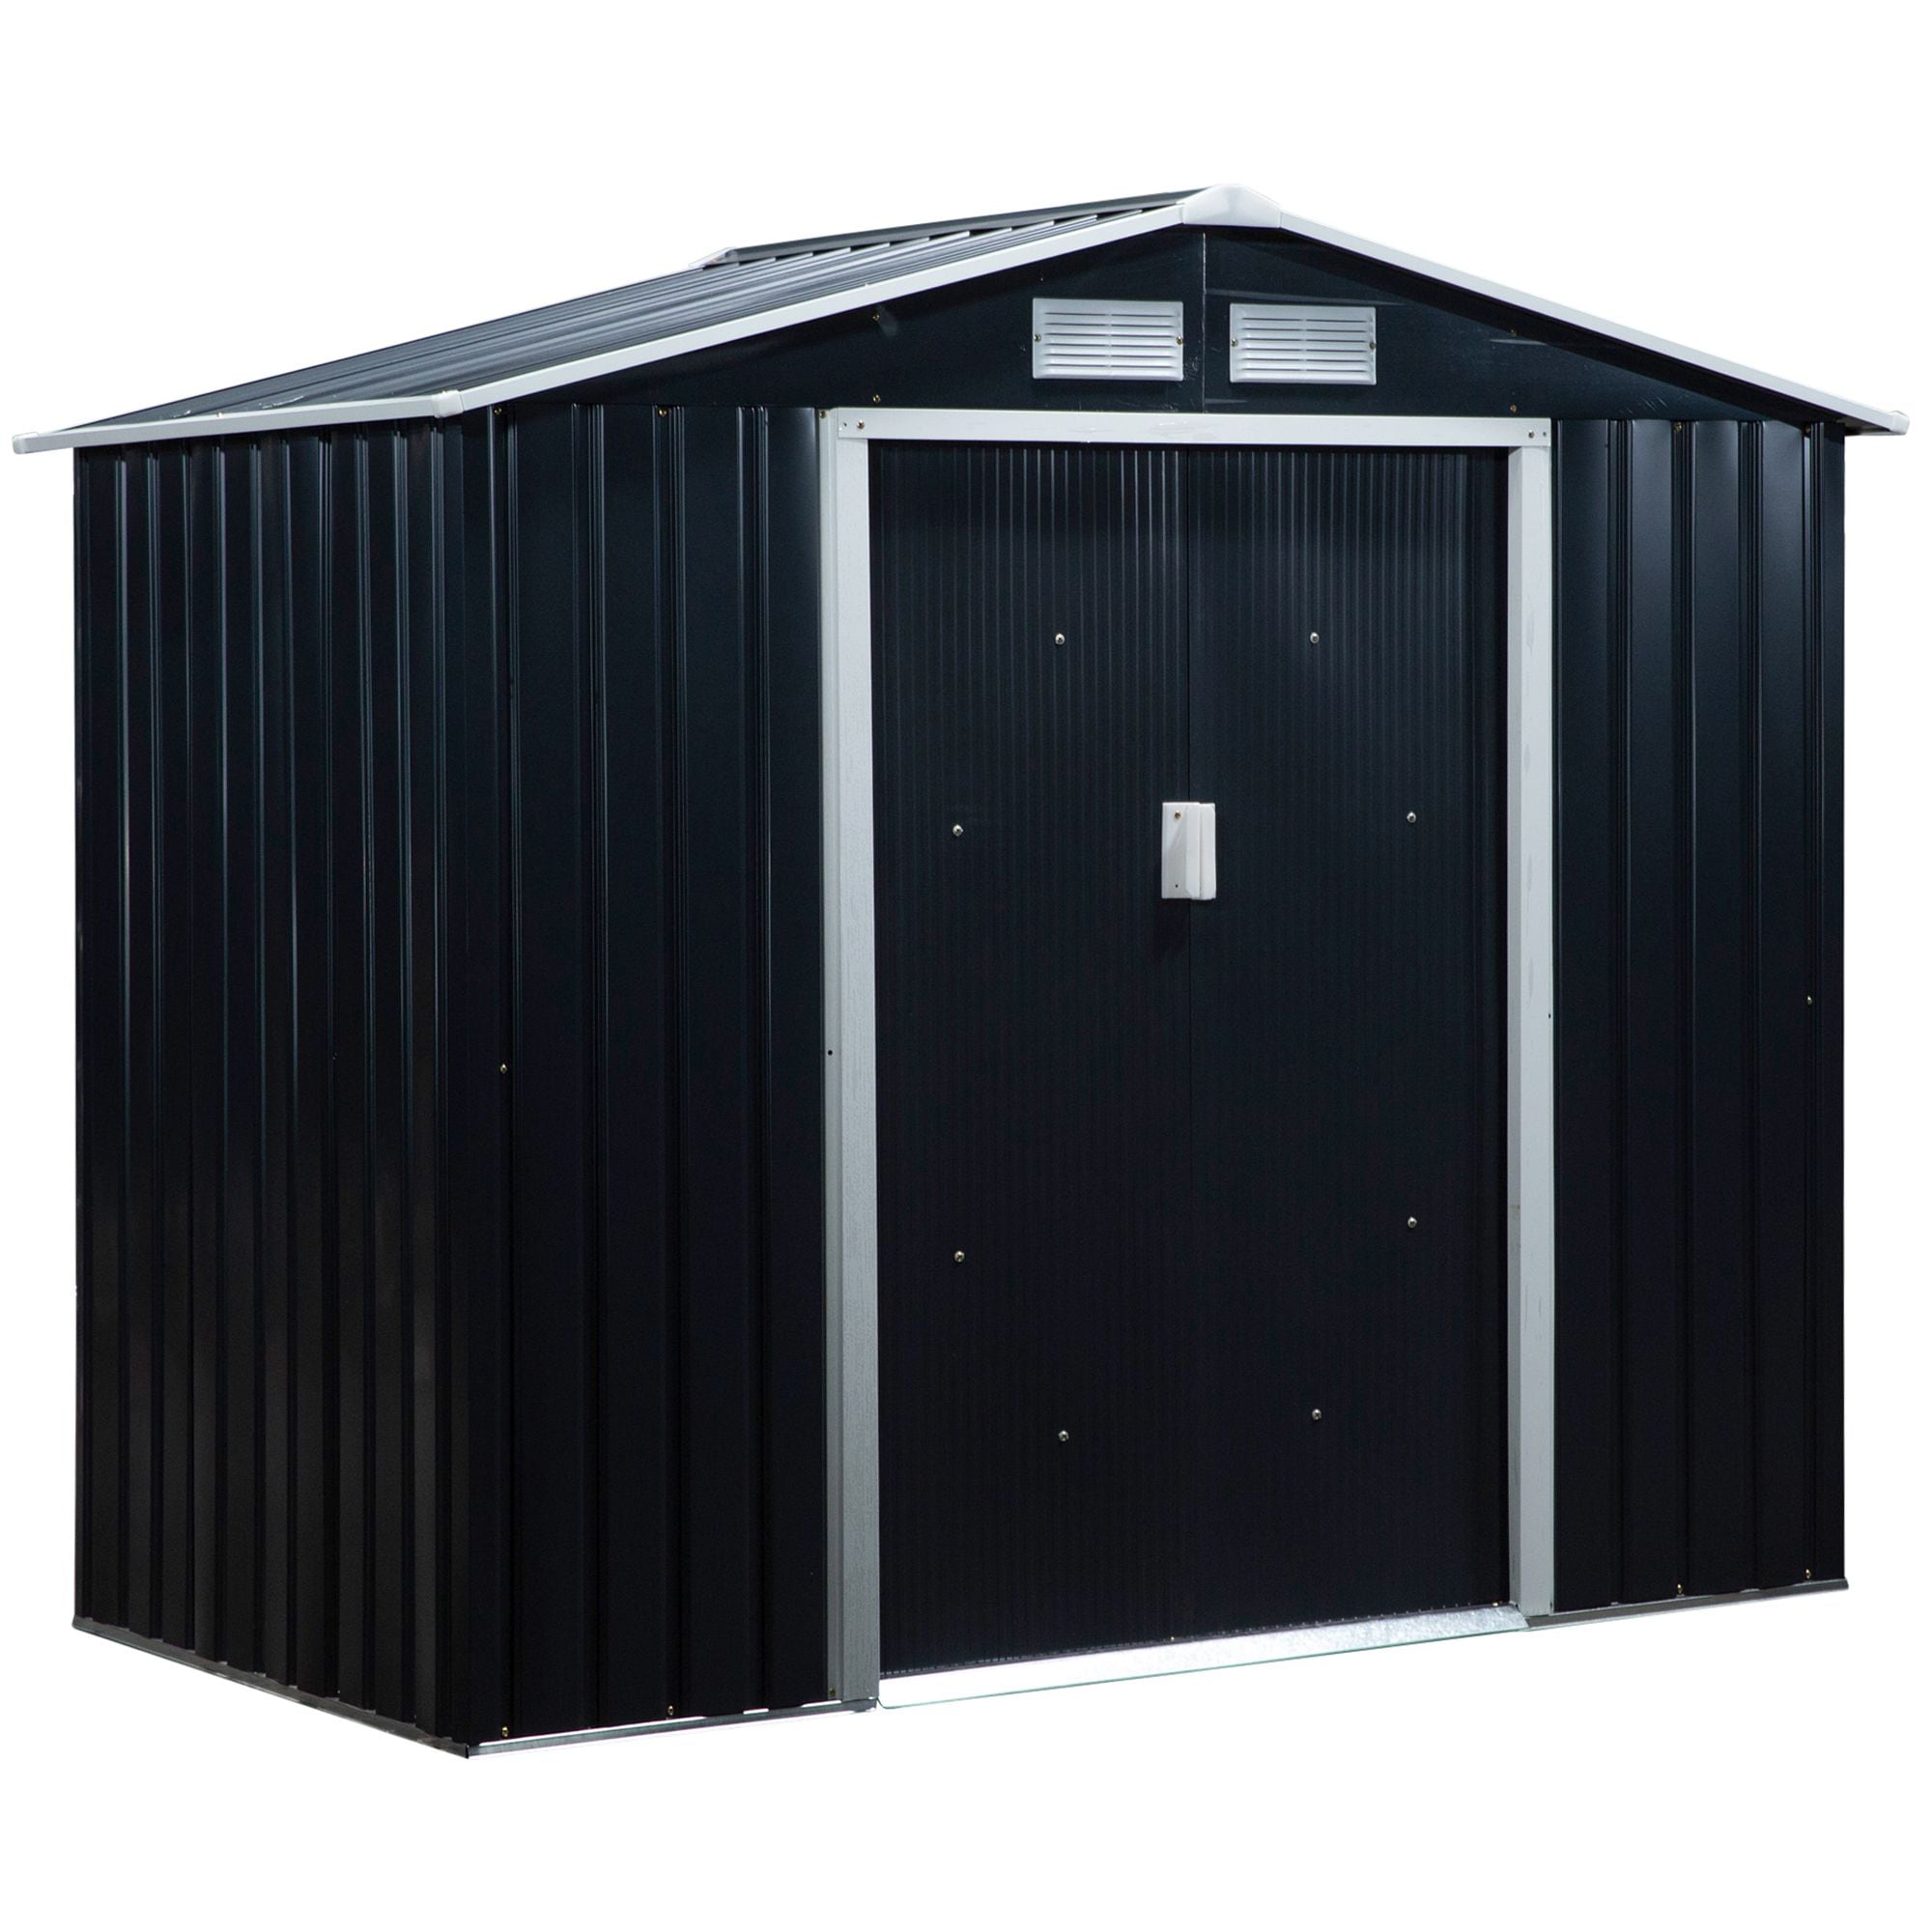 Outsunny Vinyl-coated Steel Storage Shed in the Metal Storage